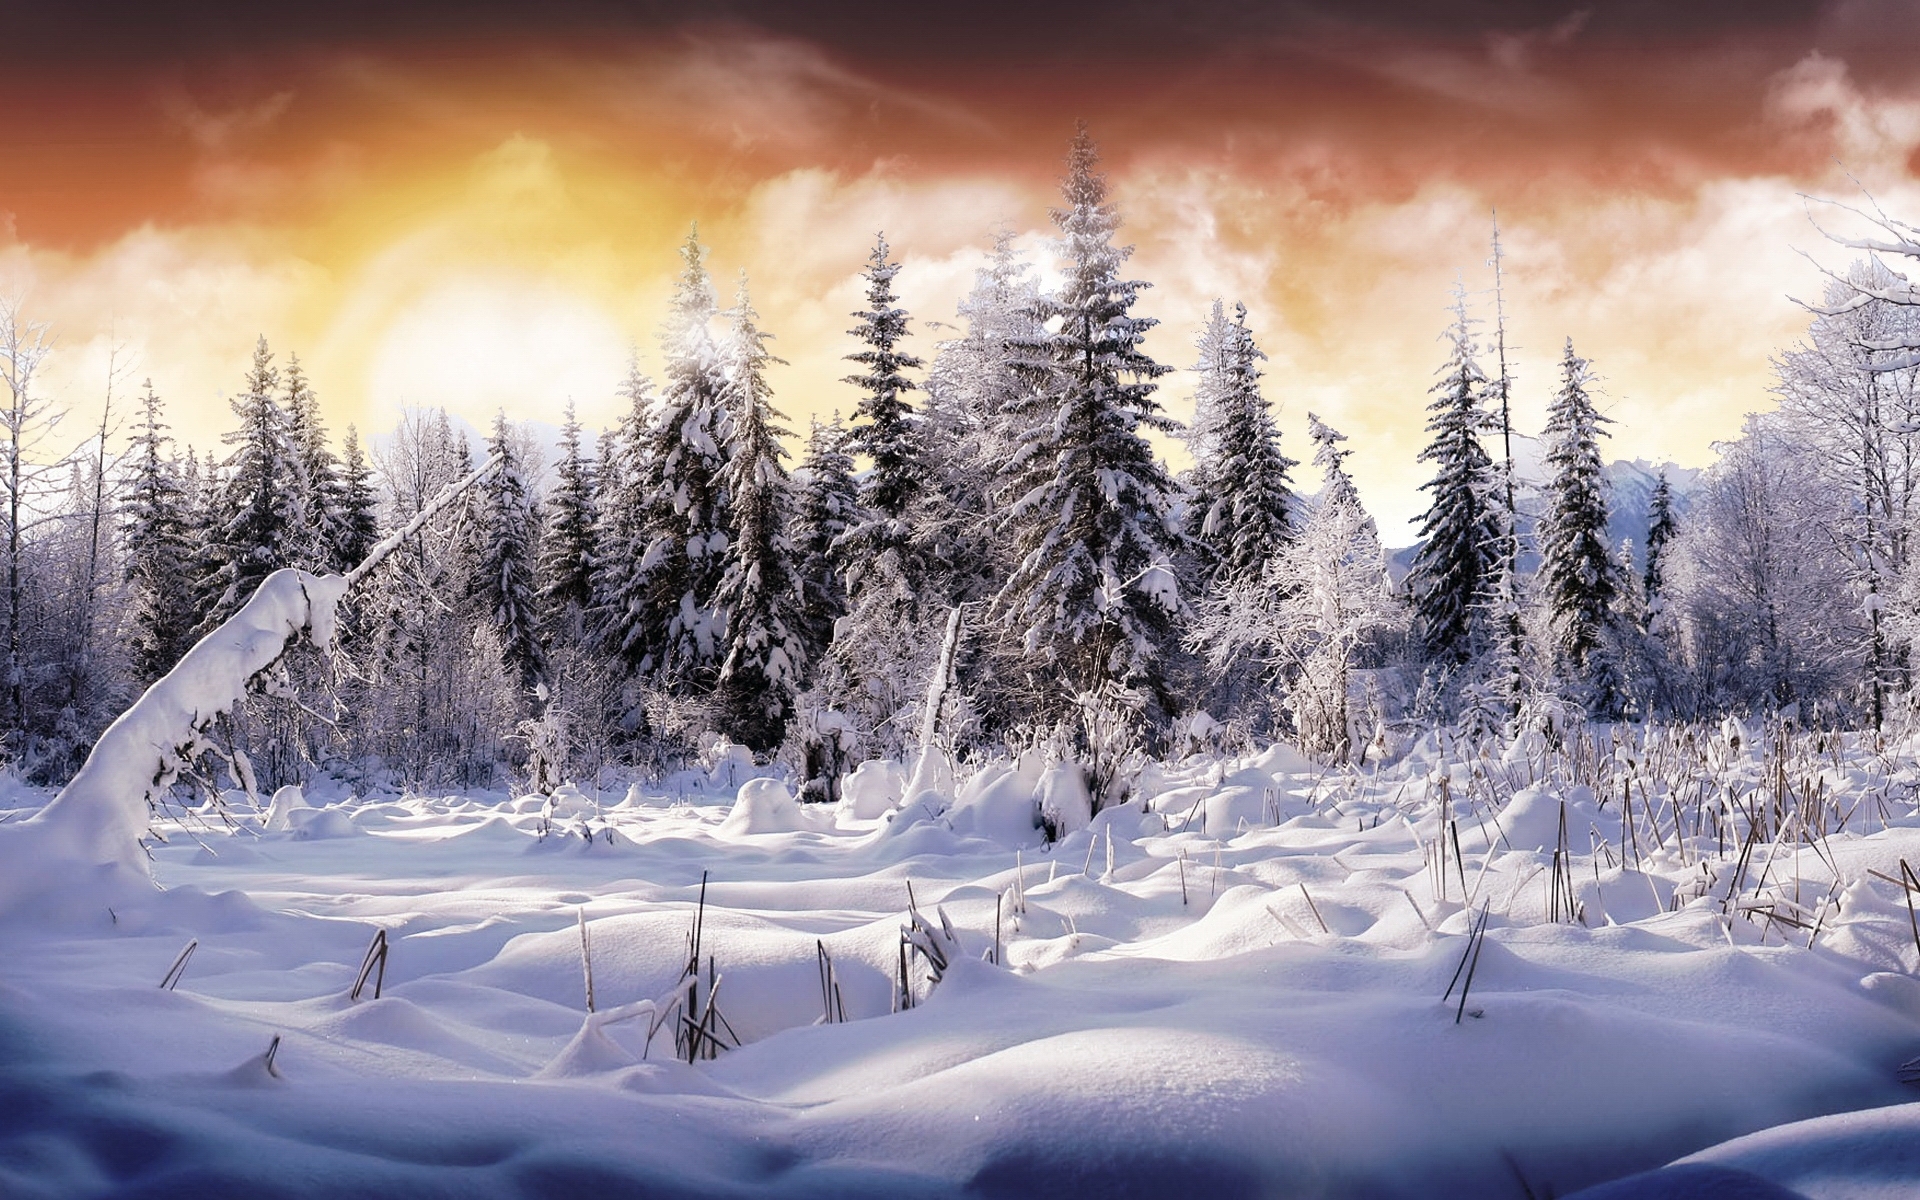 47816 1440x900 PC pictures for free, download trees, fir-trees, winter, landscape 1440x900 wallpapers on your desktop